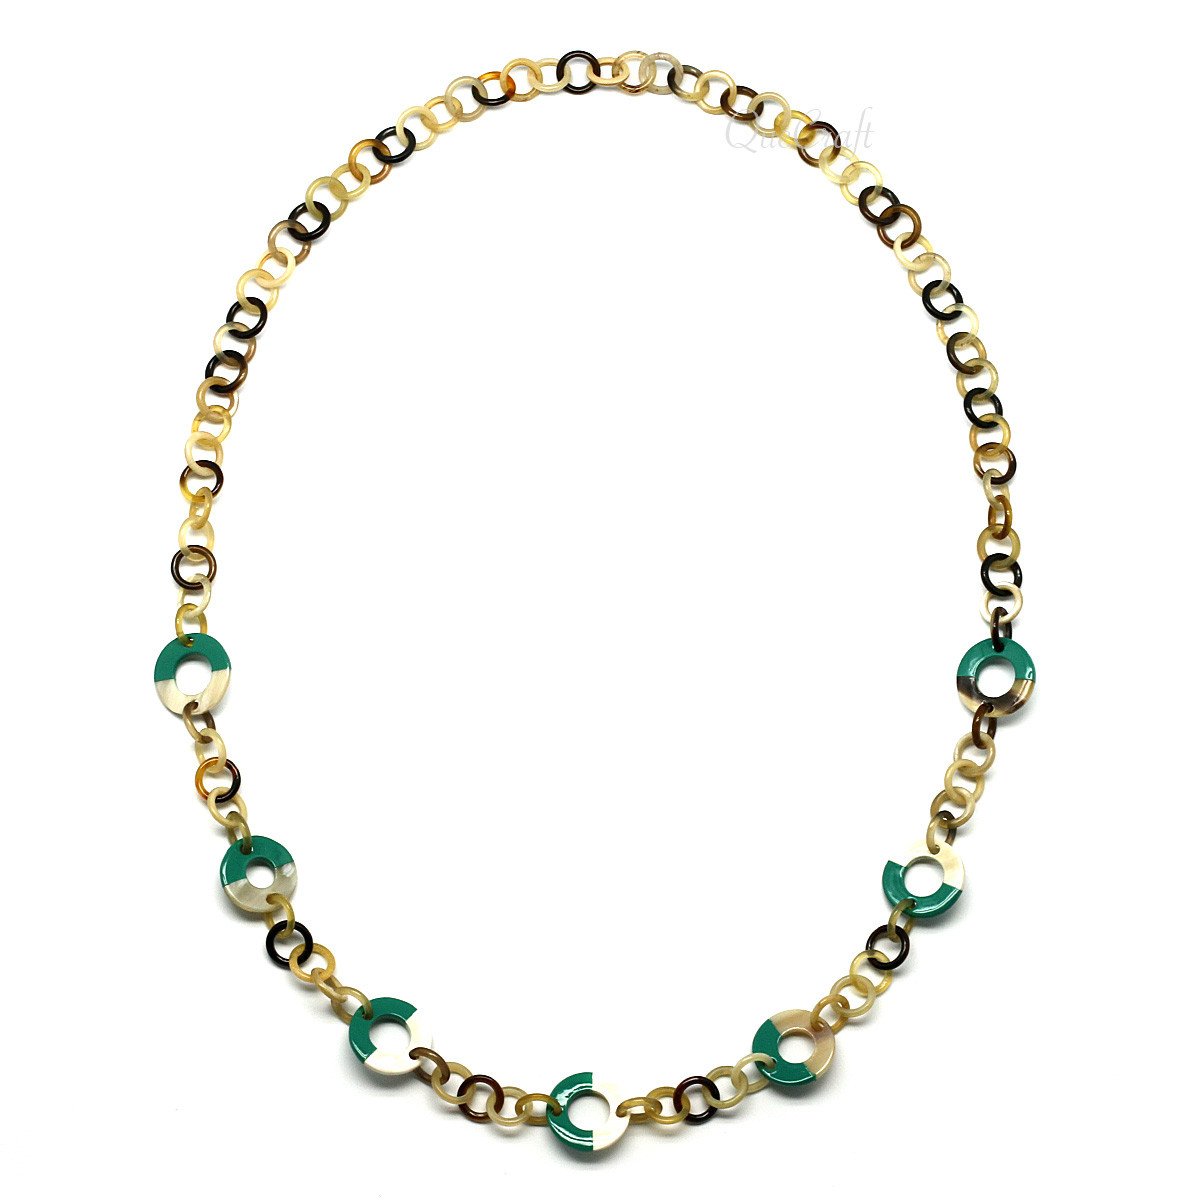 Horn & Lacquer Chain Necklace #9724 - HORN JEWELRY